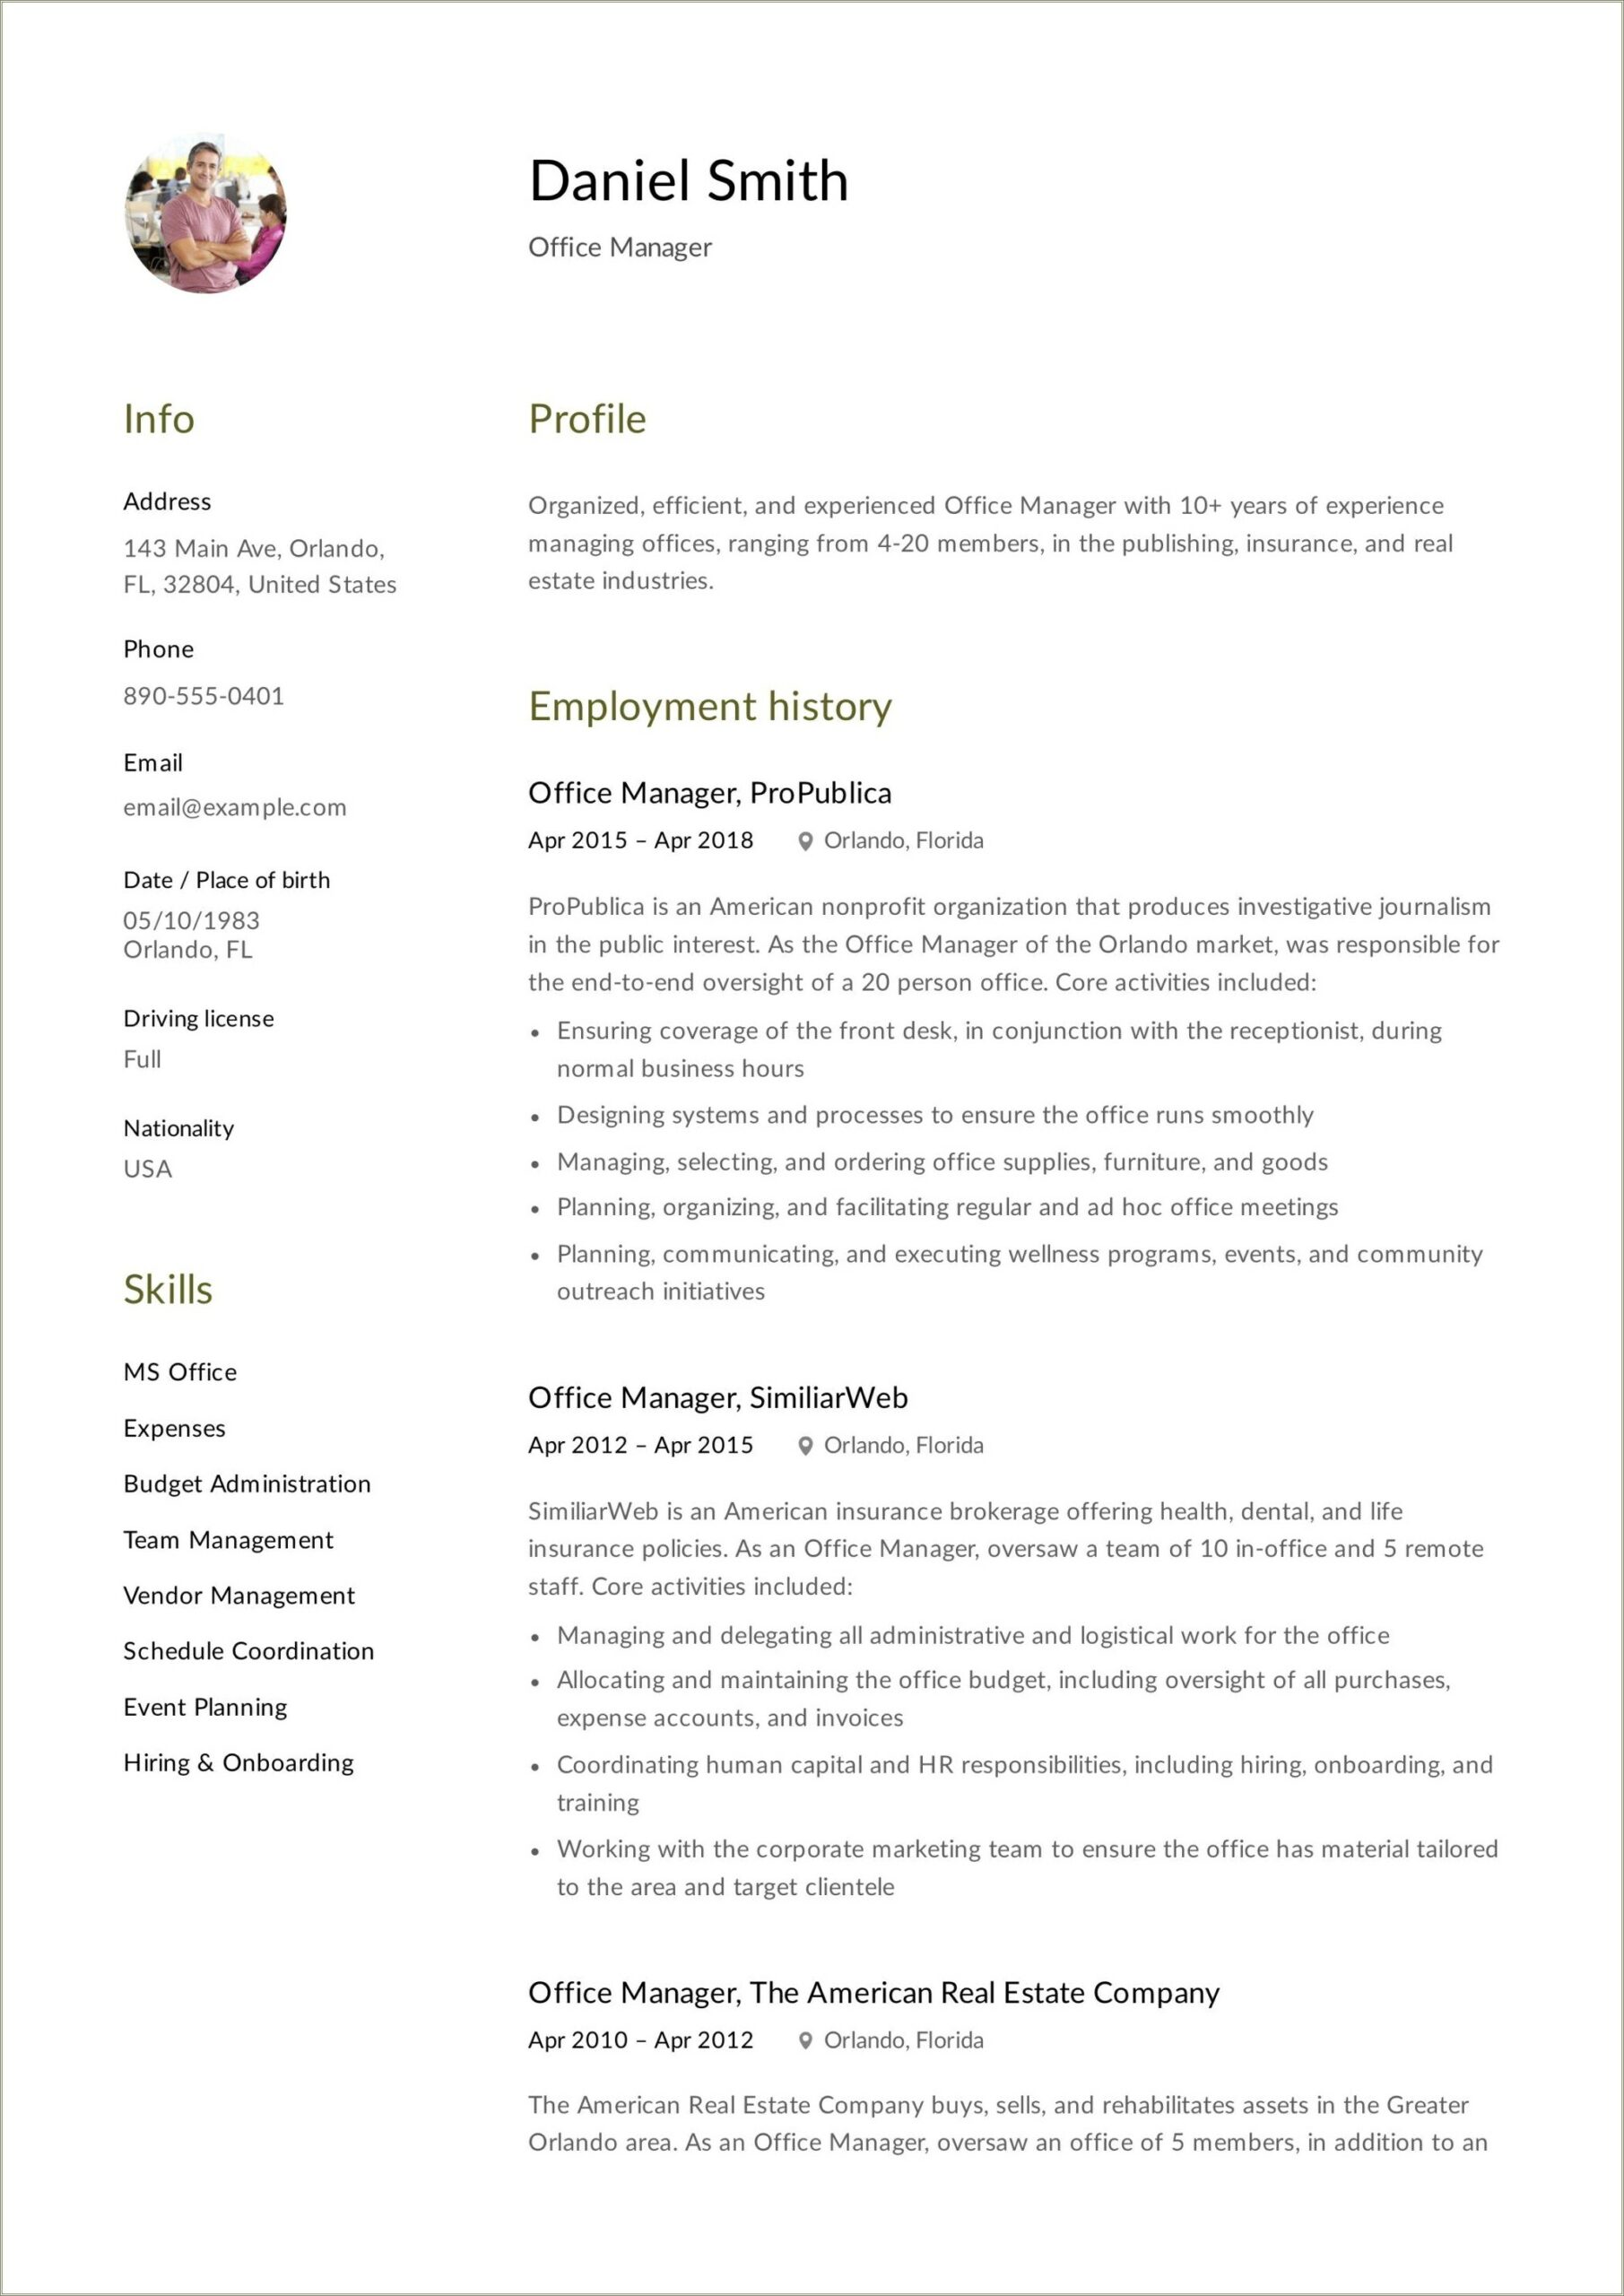 Office Manager For Construction Company Resume